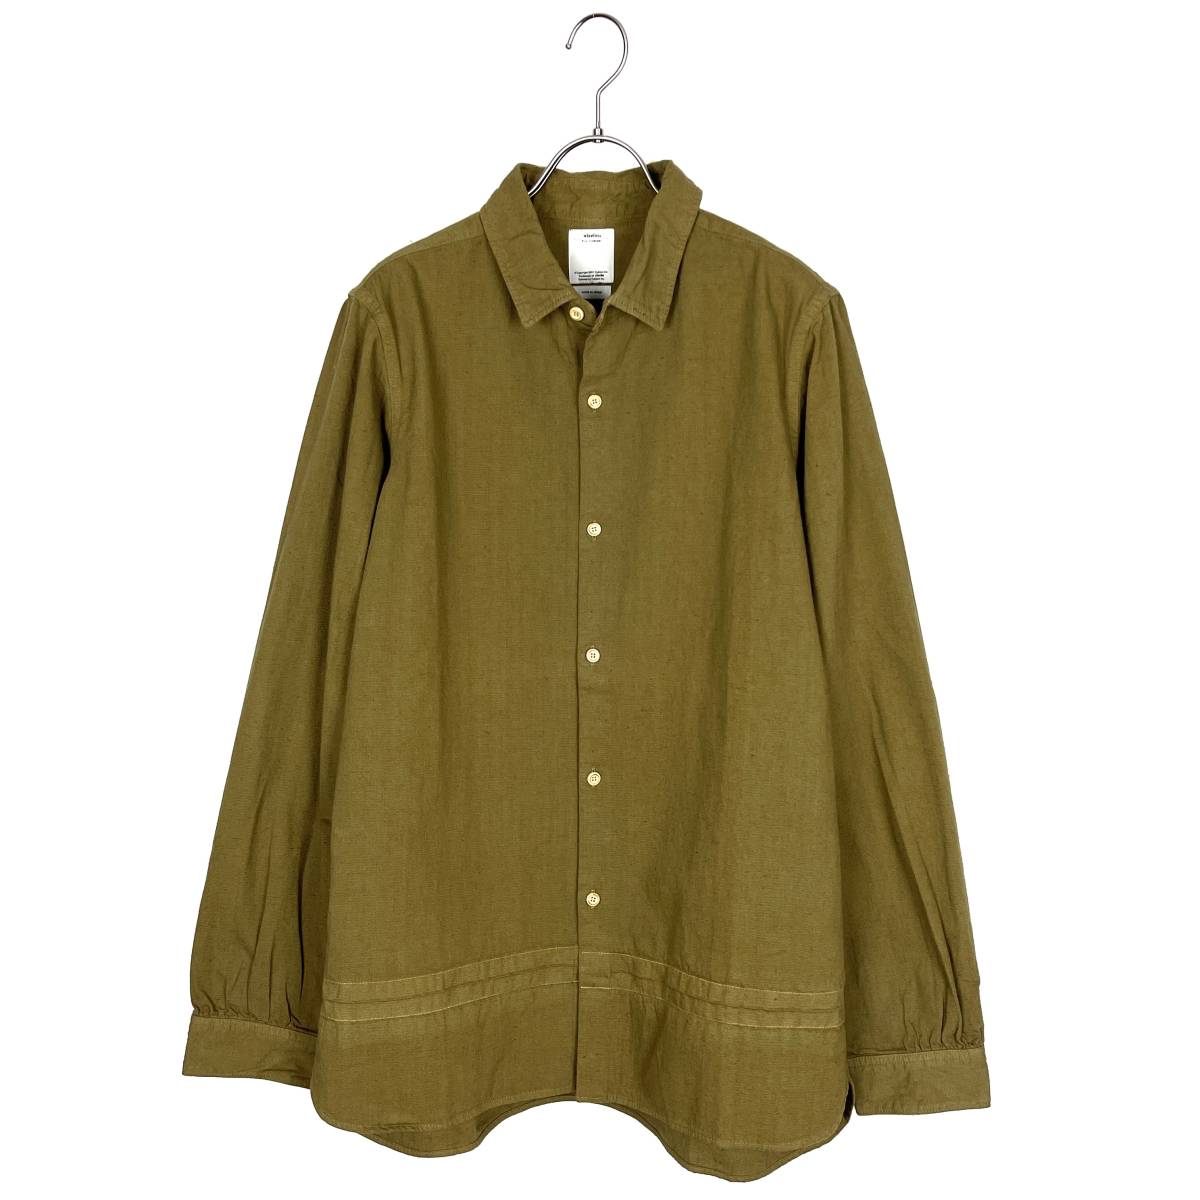 VISVIM(ビズビム) LONG RIDER L/S OVER DYED (olive) 16AW